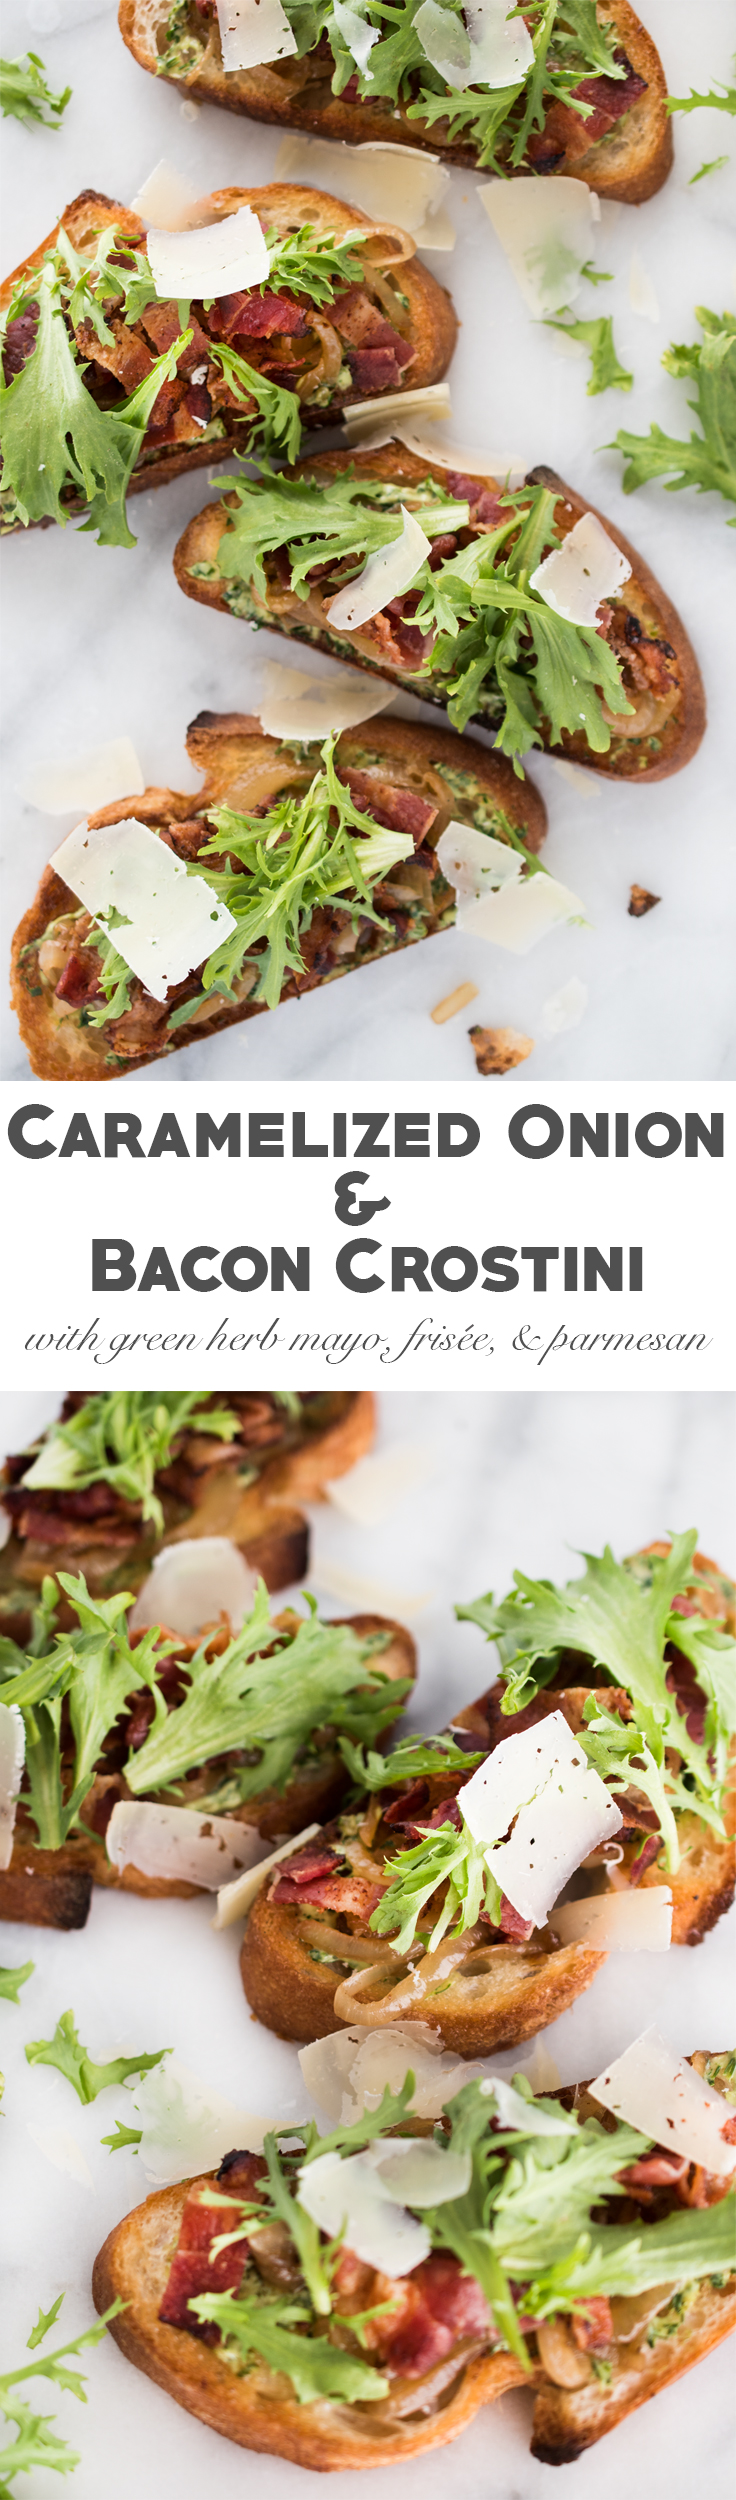 Caramelized Onion and Bacon Crostini with Green Herb Mayo, Frisée, and Parmesan